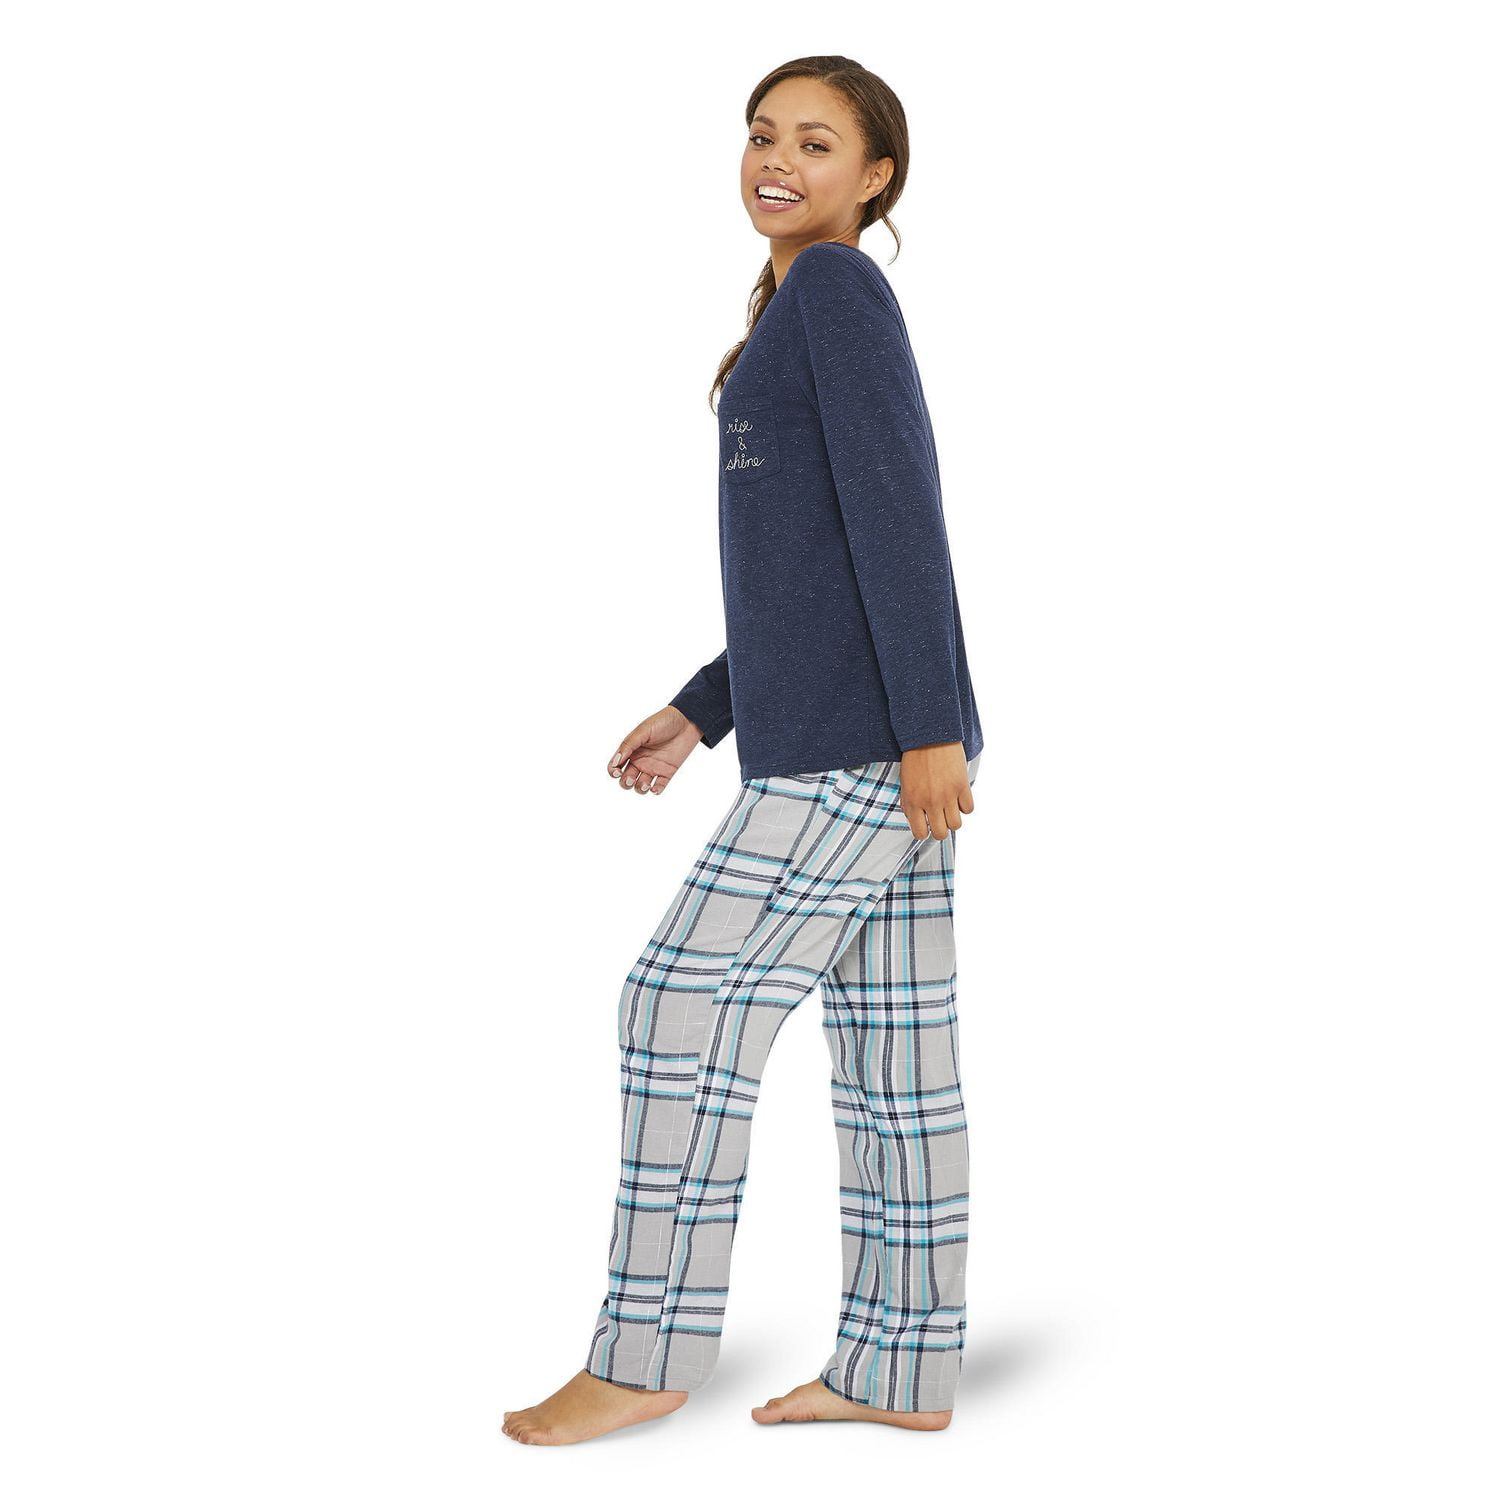 Lands' End Women's Print Flannel Pajama Pants - Xx Small - Evening